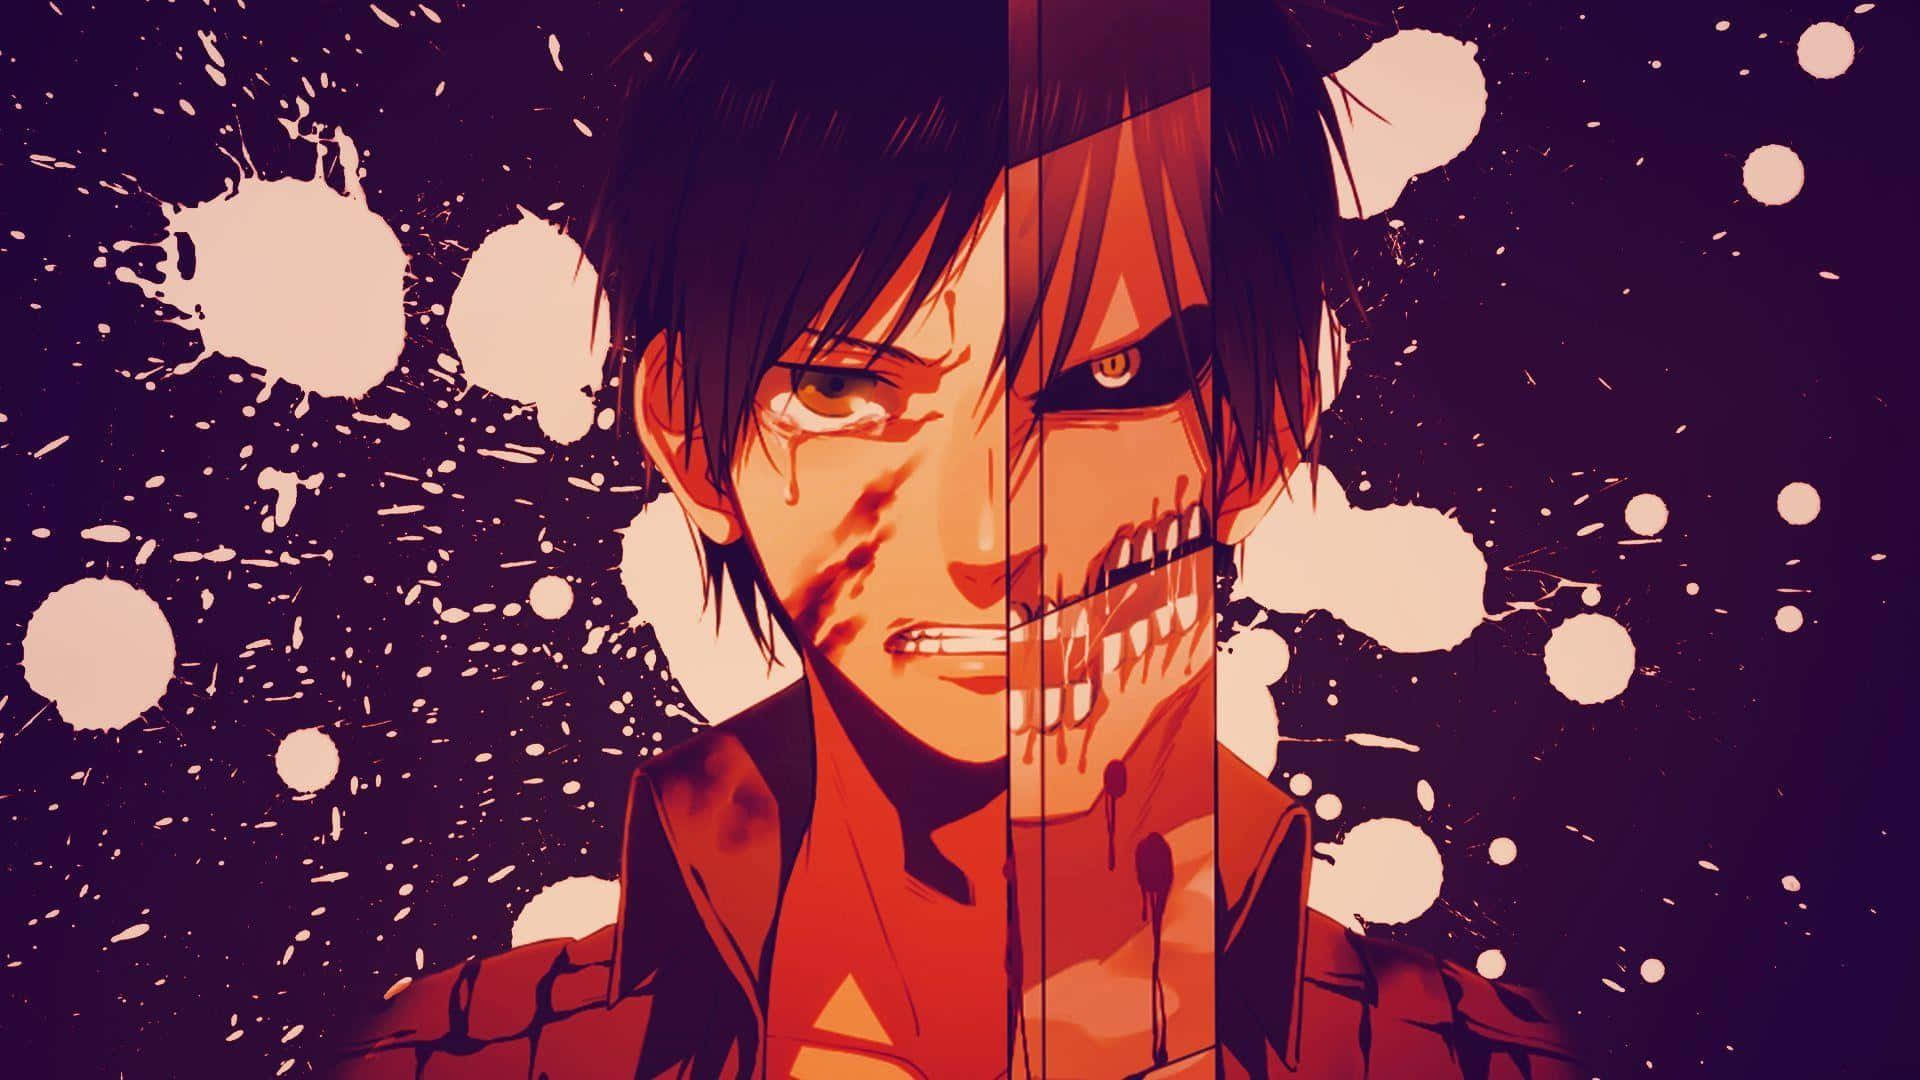 Eren Yeager has become a powerful Titan in Attack on Titan. Wallpaper